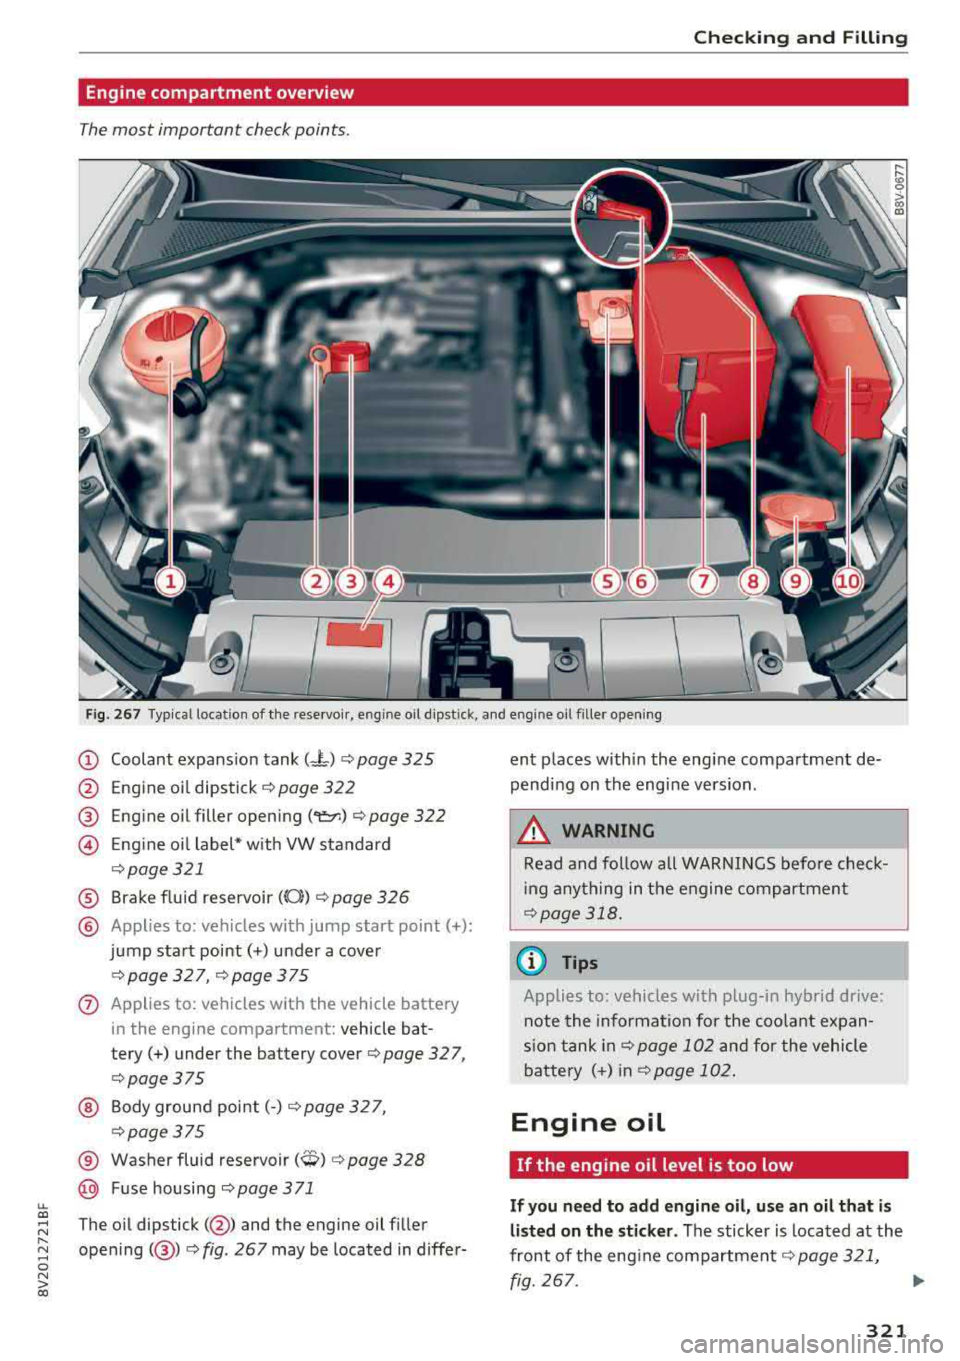 AUDI A3 SEDAN 2018  Owners Manual LL co .... N 
" N .... 0 N > co 
Checking  and  Filling 
Engine  compartment  overview 
The most  important  check points . 
Fig . 267 Typical  location  of the reservoi r,  engine  oil d ipst ick, an